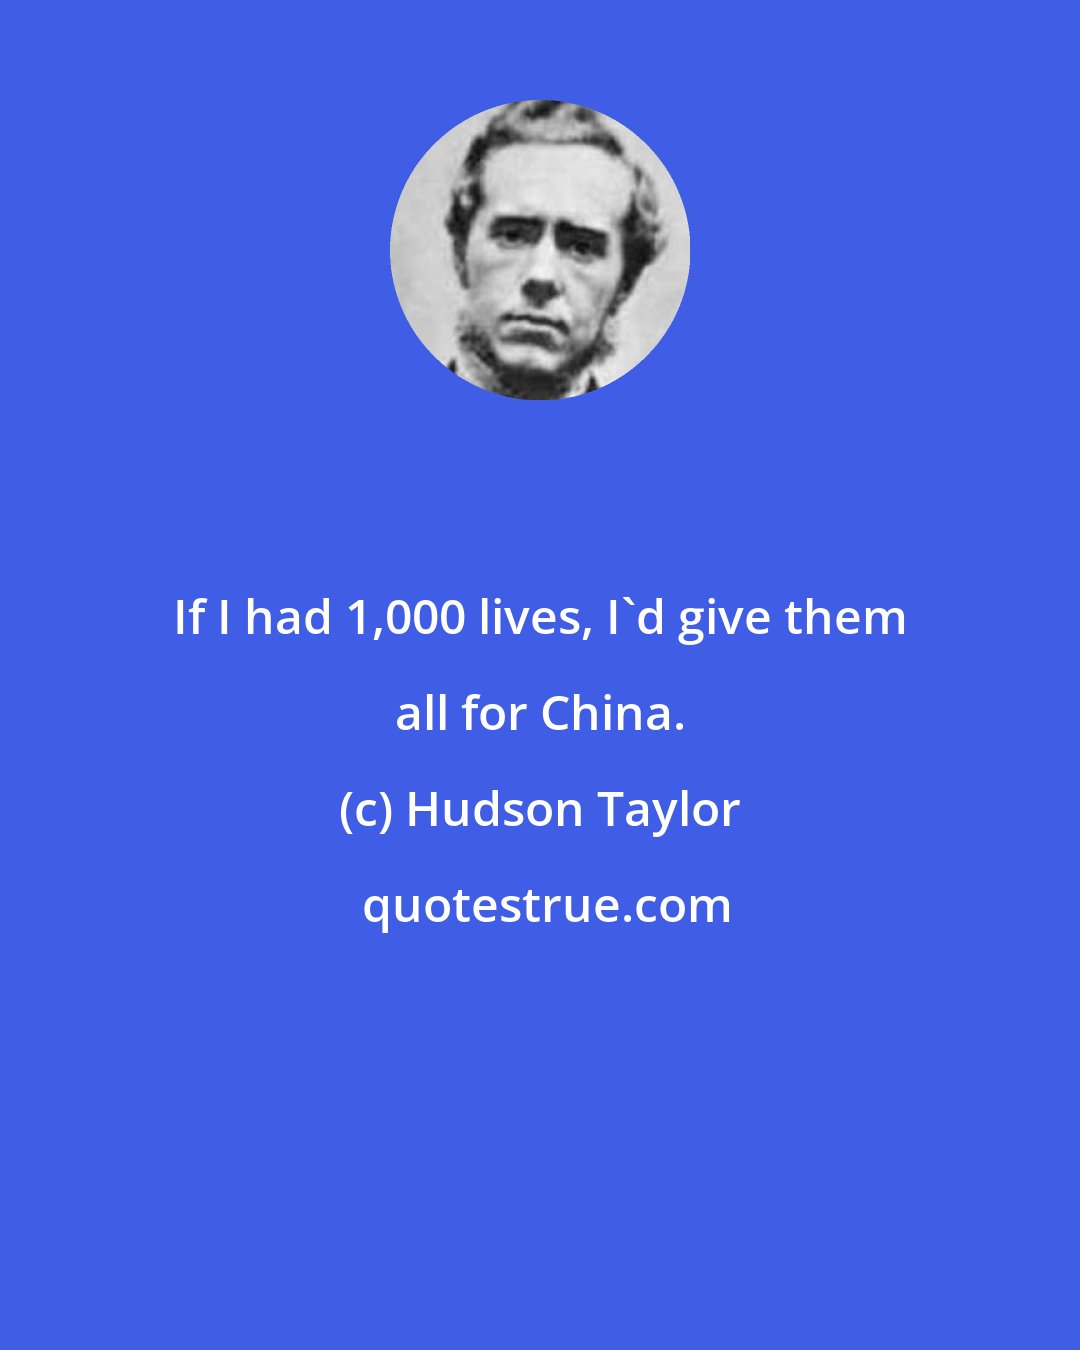 Hudson Taylor: If I had 1,000 lives, I'd give them all for China.